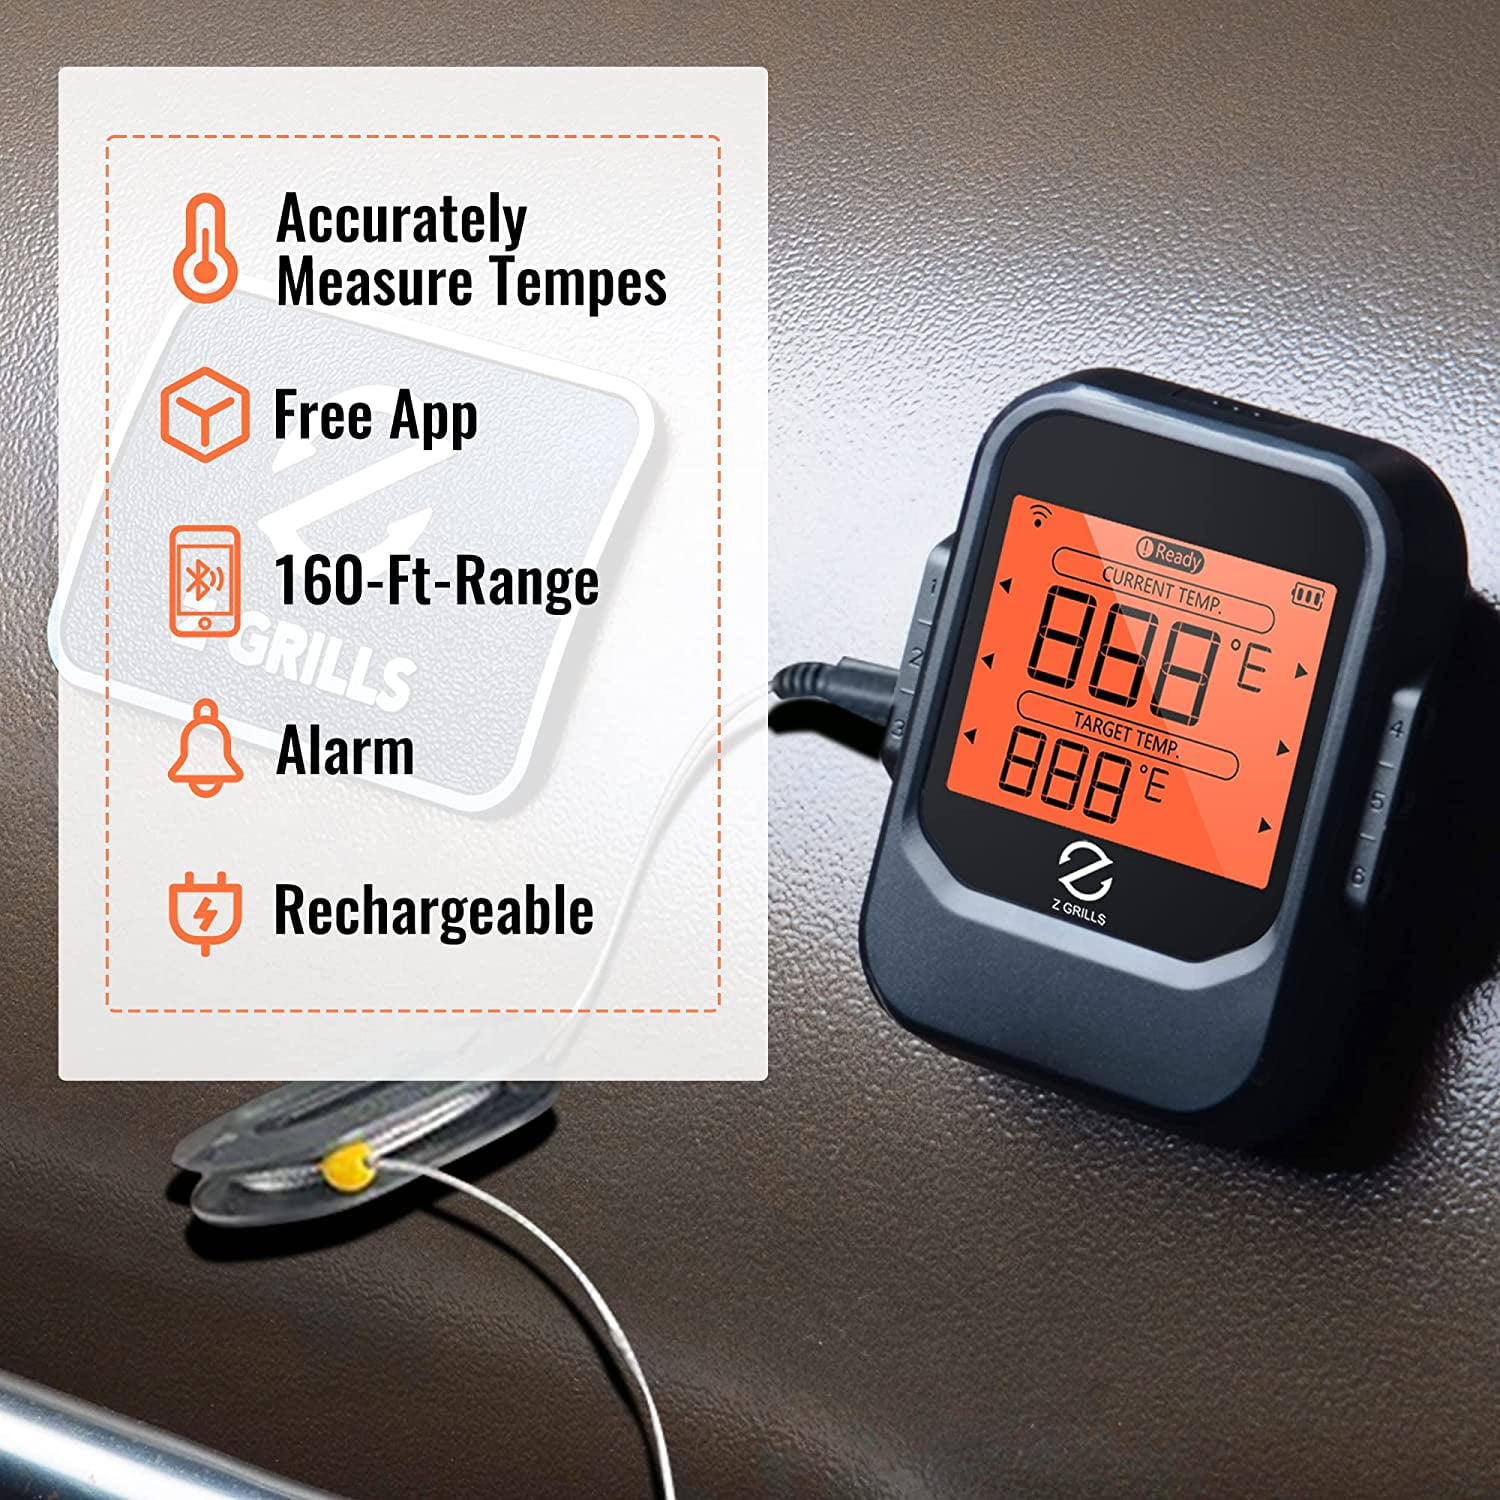 Z GRILLS Wood Pellet Grill Smoker with Wireless Meat Probe Thermometer - On  Sale - Bed Bath & Beyond - 36406647